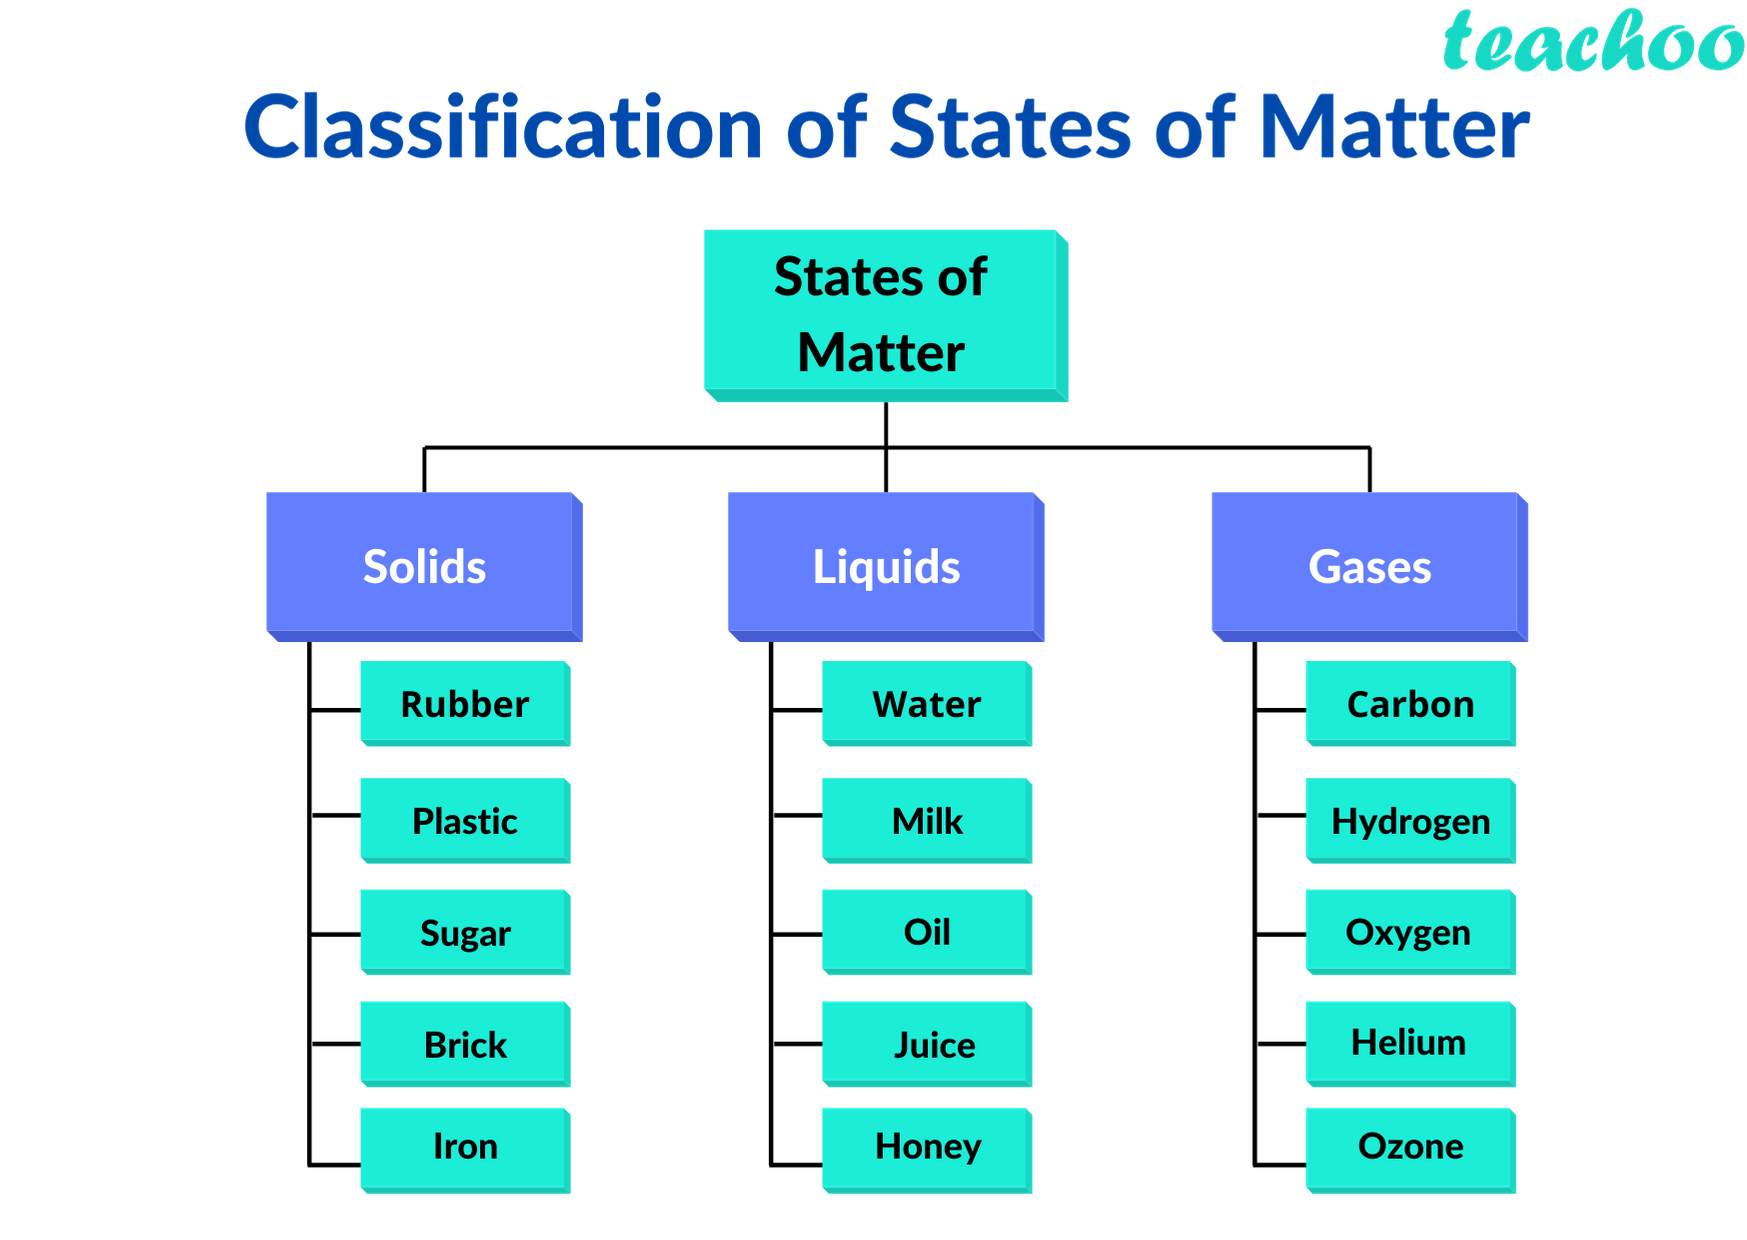 states-of-matter-chapter-1-class-9-science-notes-teachoo